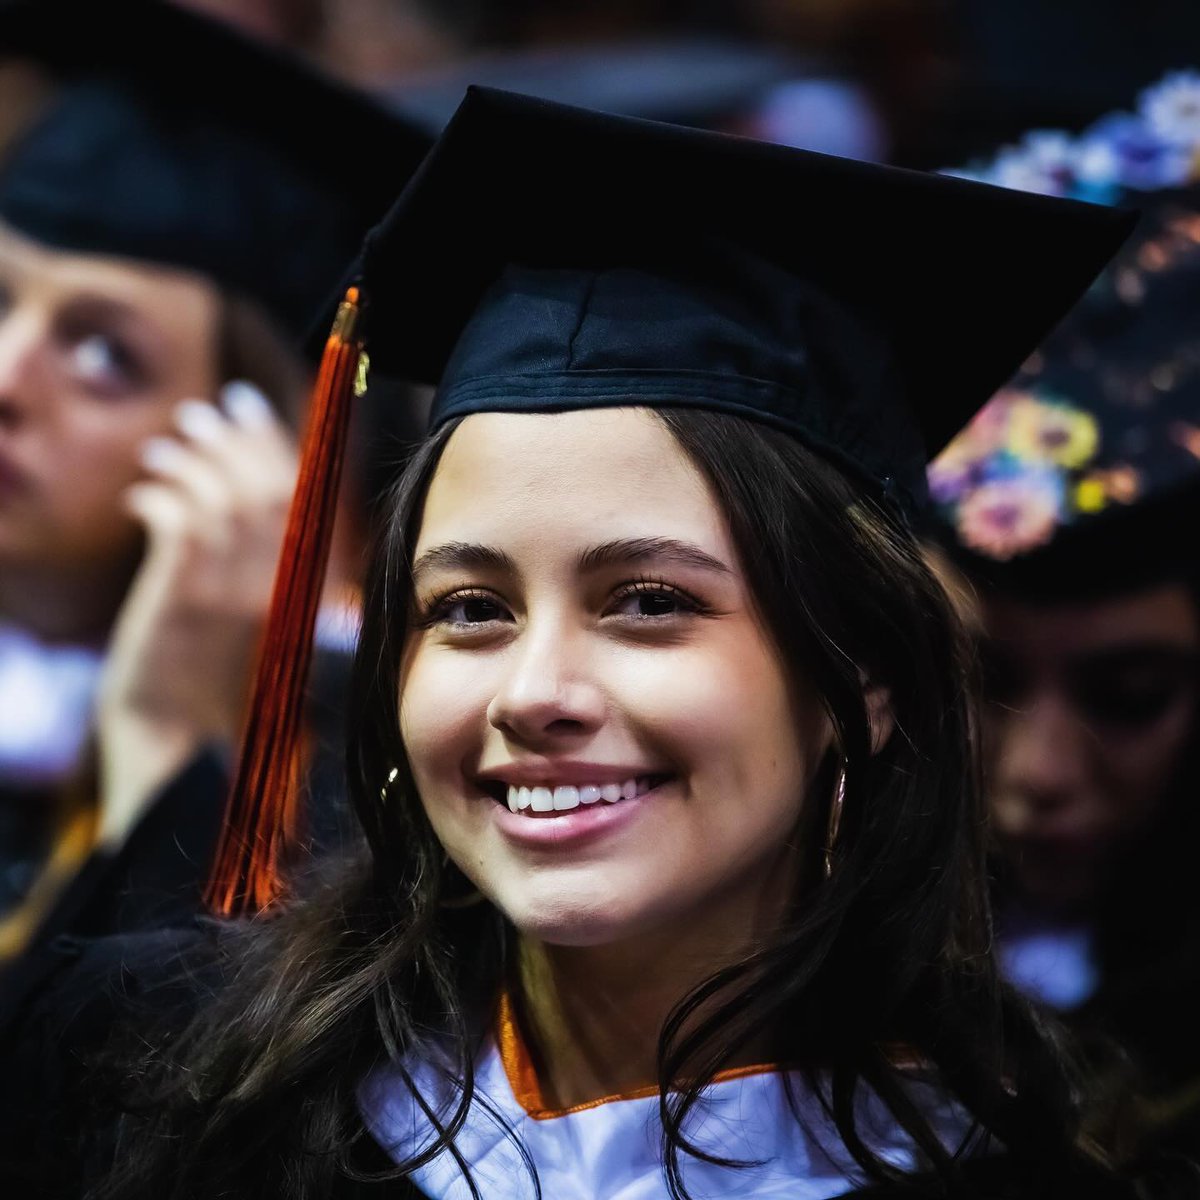 When you find out today is the deadline to RSVP and order your cap and gown 🎓 for #WPUNJ2024 Commencement ➡️➡️➡️ but then remember you already did 😉 Reminder 👉 If you’re graduating this semester, you can sign up for this one! RSVP here 🎓🙌 bit.ly/WPUNJ2024